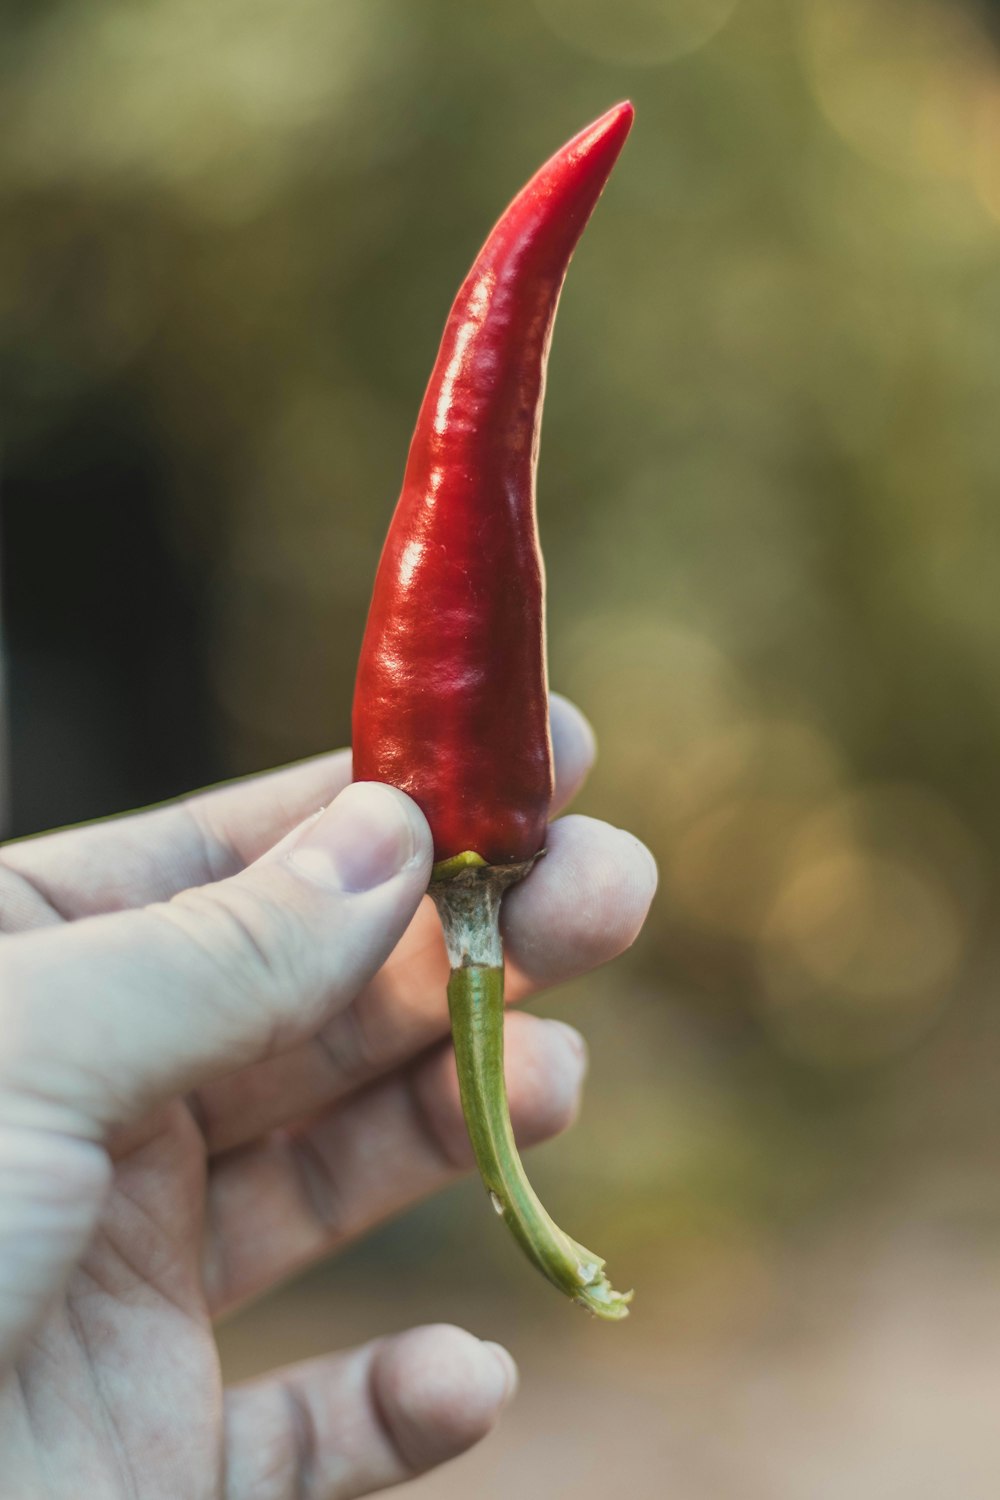 person holding red chili pepper